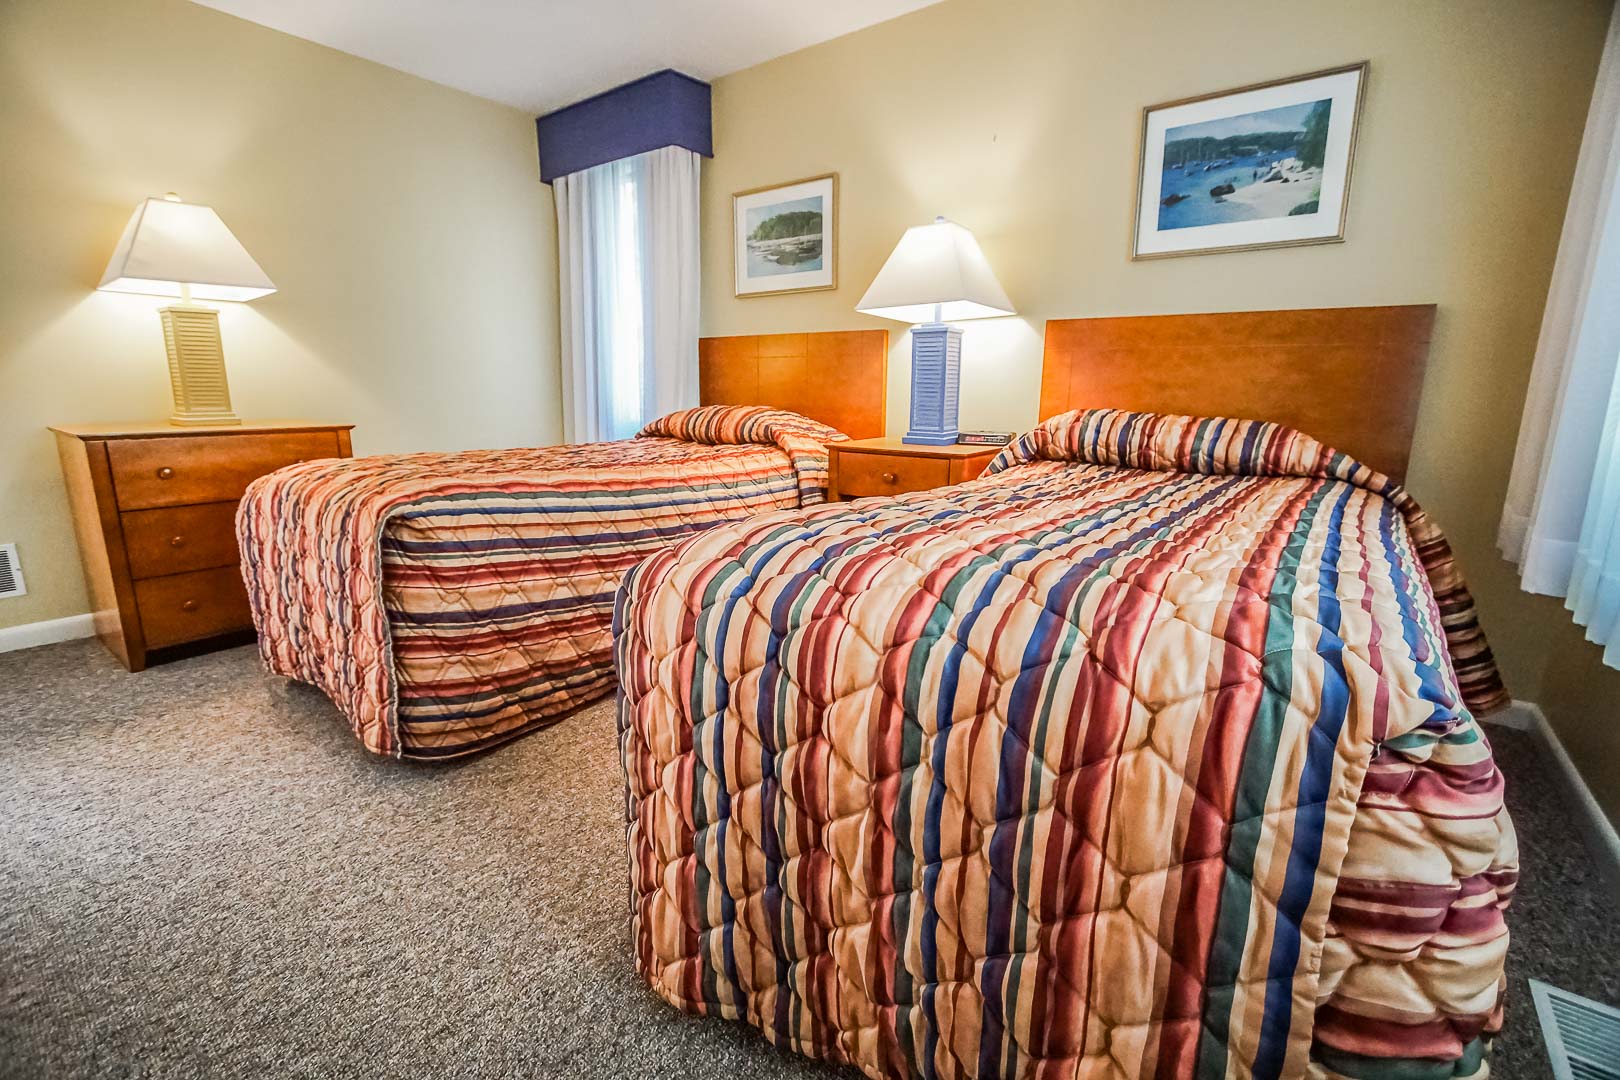 A two bedroom unit with double beds available at VRI's Cape Cod Holiday Estates in Massachusetts.